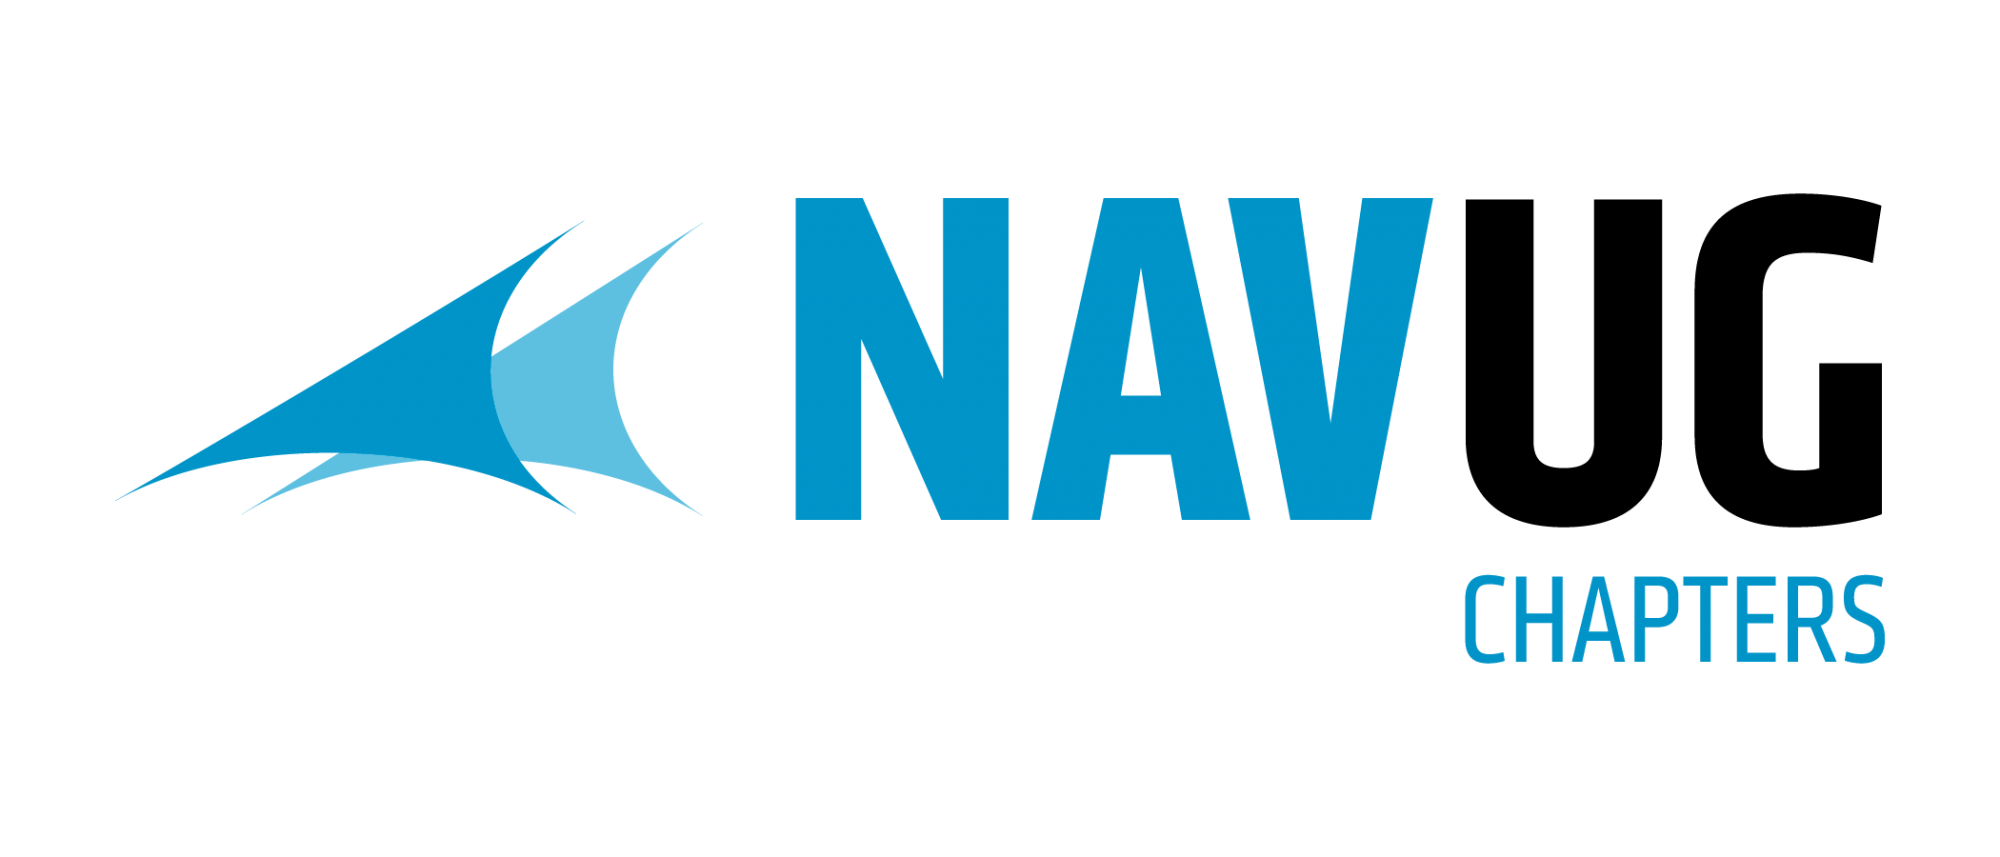 Chapters Logo - ArcherPoint Sponsors NAVUG User Group Chapters | ArcherPoint, Inc.